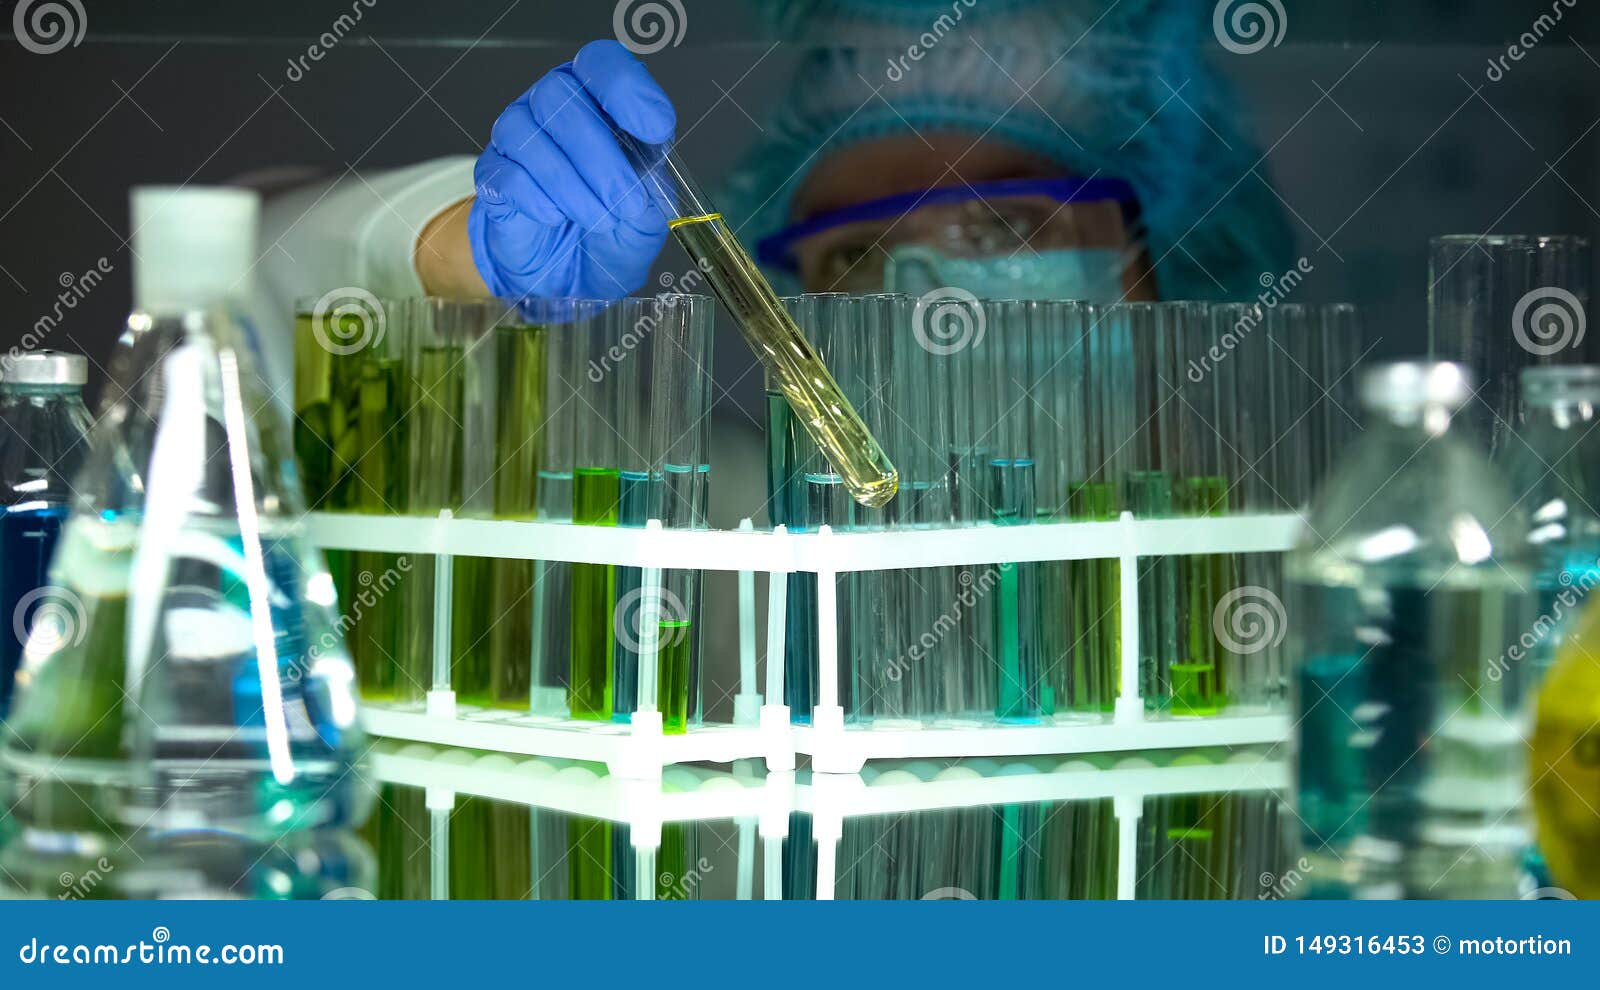 researcher checking sediments in tubes with test liquids, vitamin production